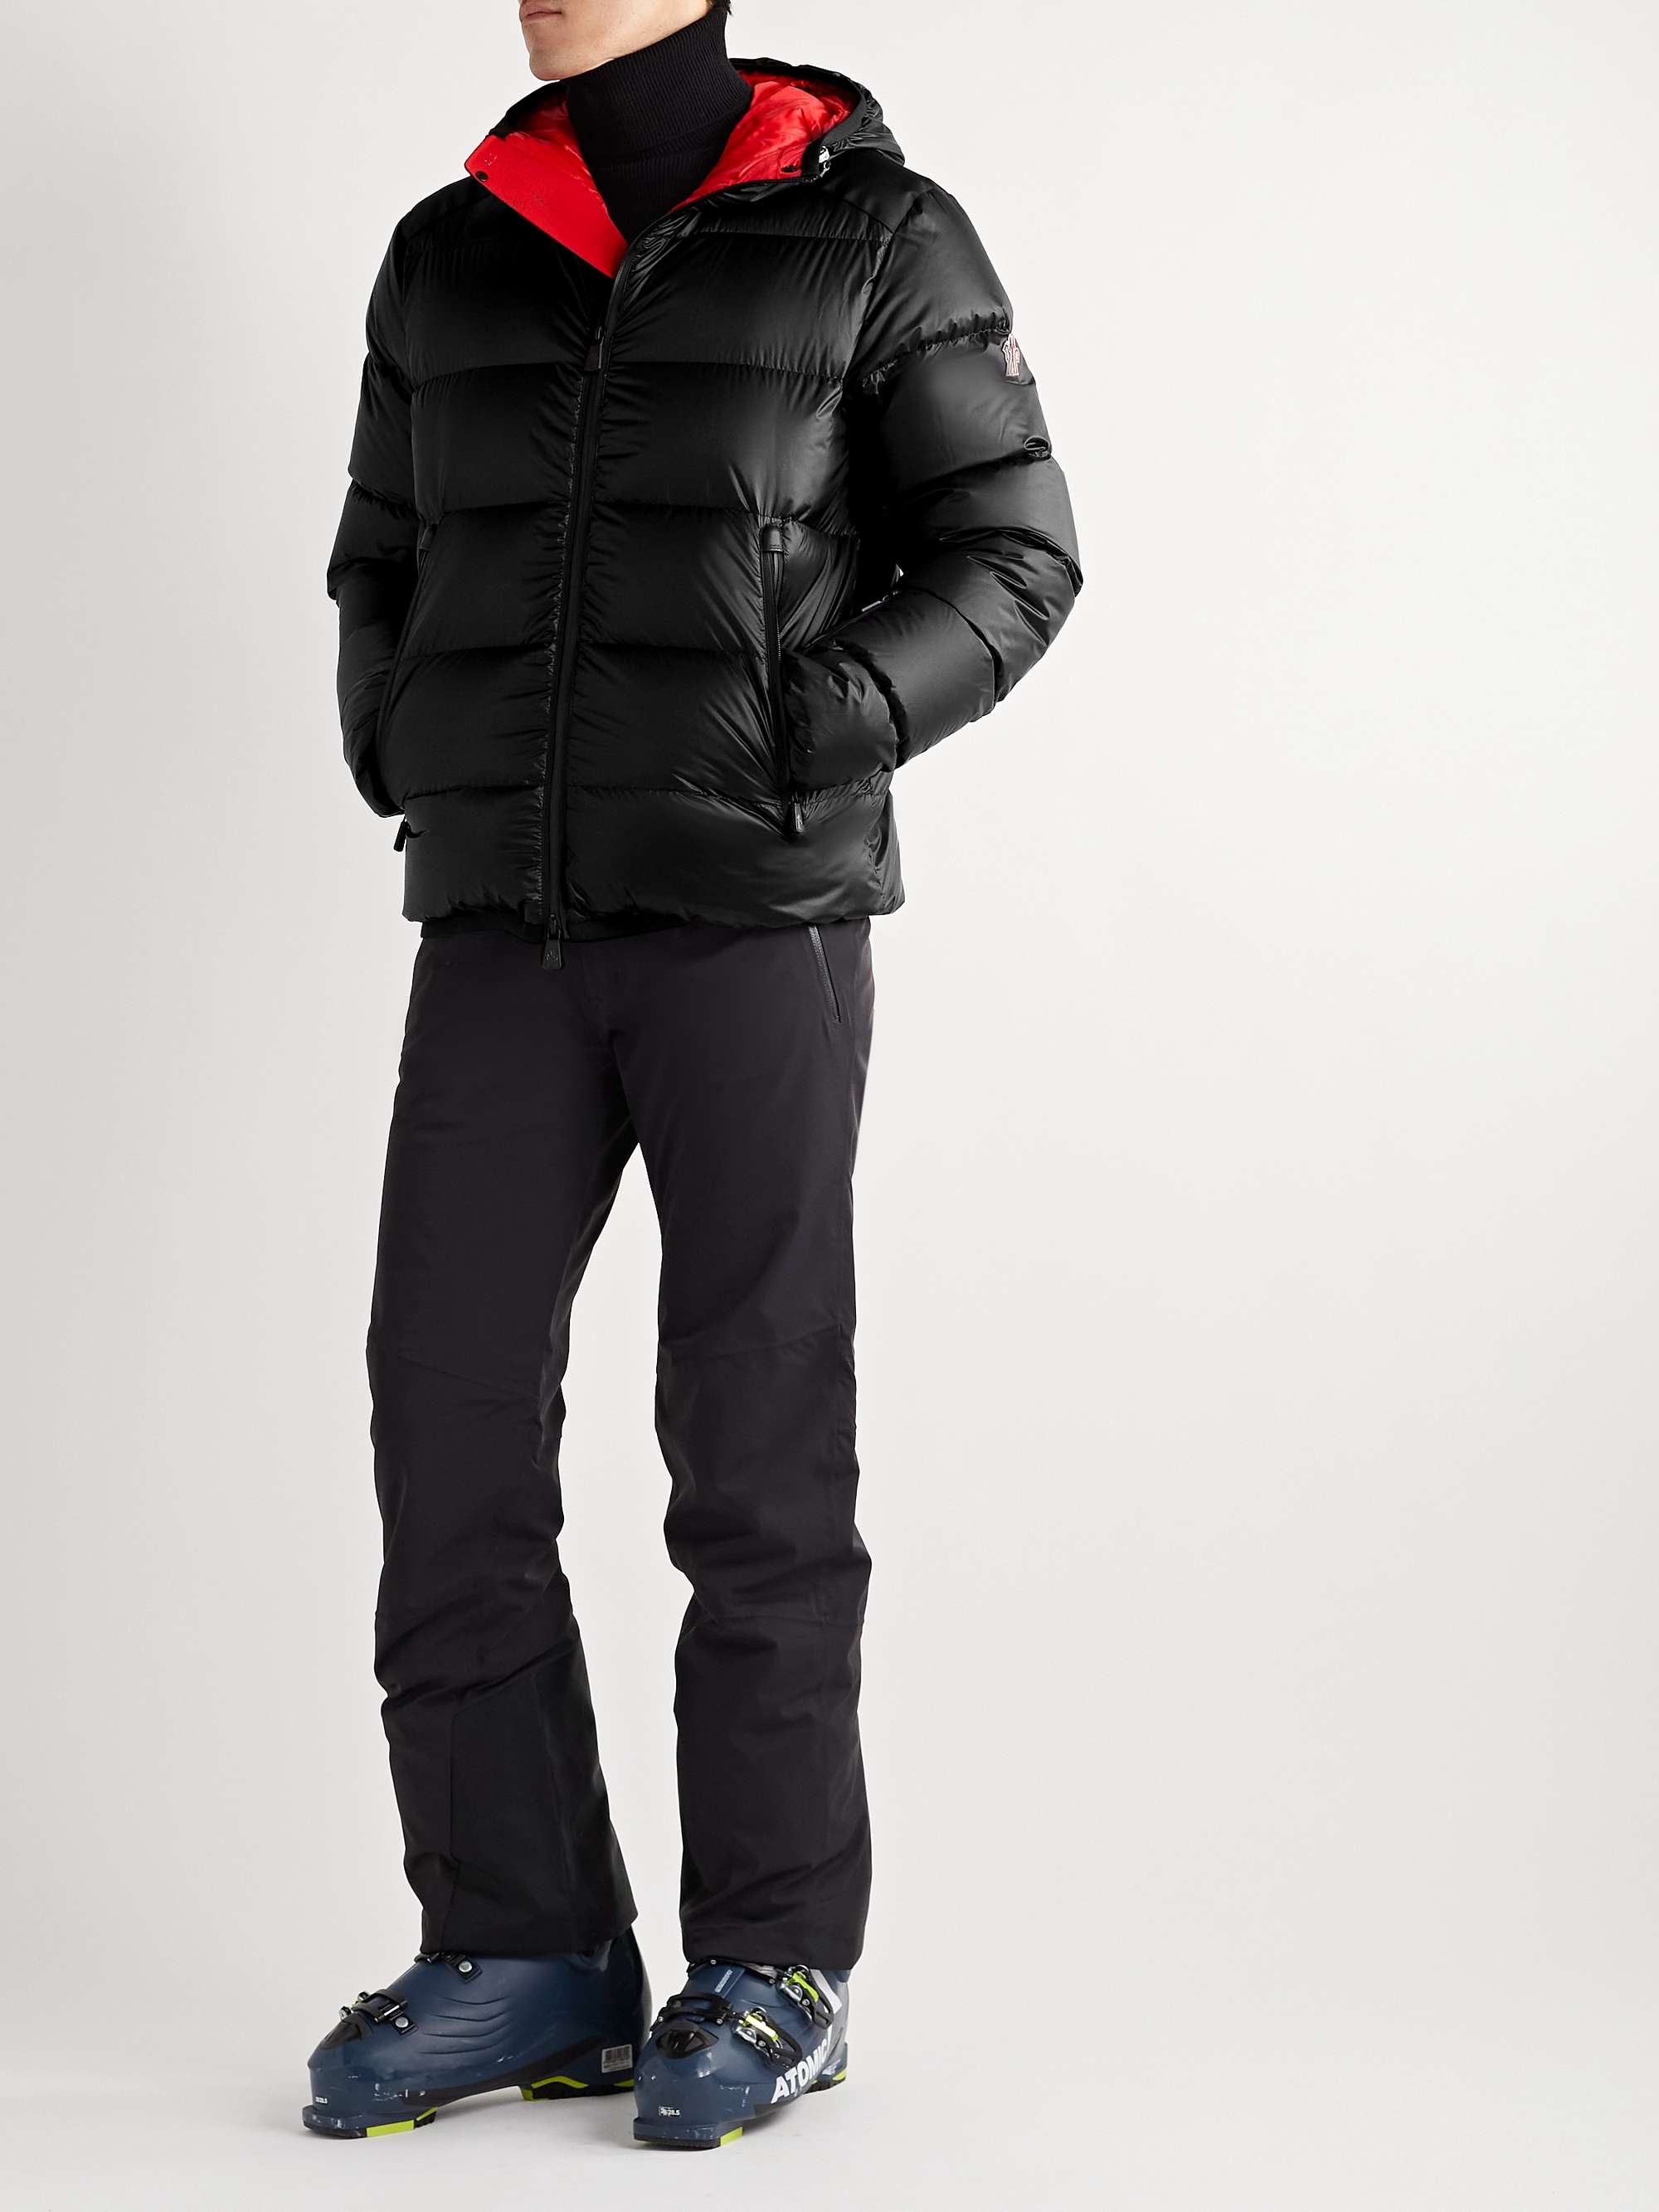 MONCLER GRENOBLE Hintertux Slim-Fit Quilted Hooded Down Ski Jacket